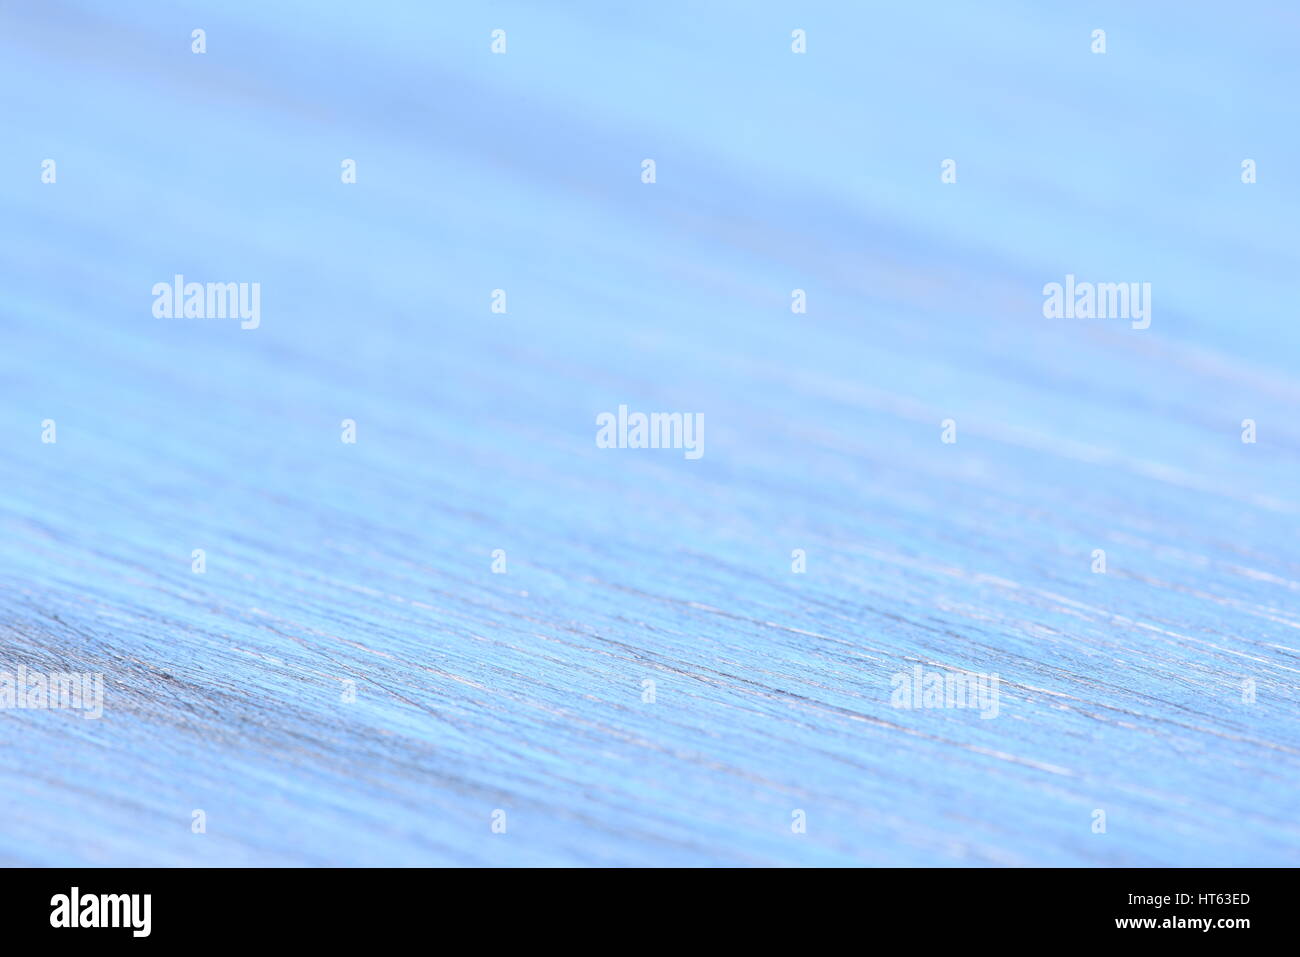 Scratched Aluminum Plate Texture or Background with Selective Focus Stock Photo